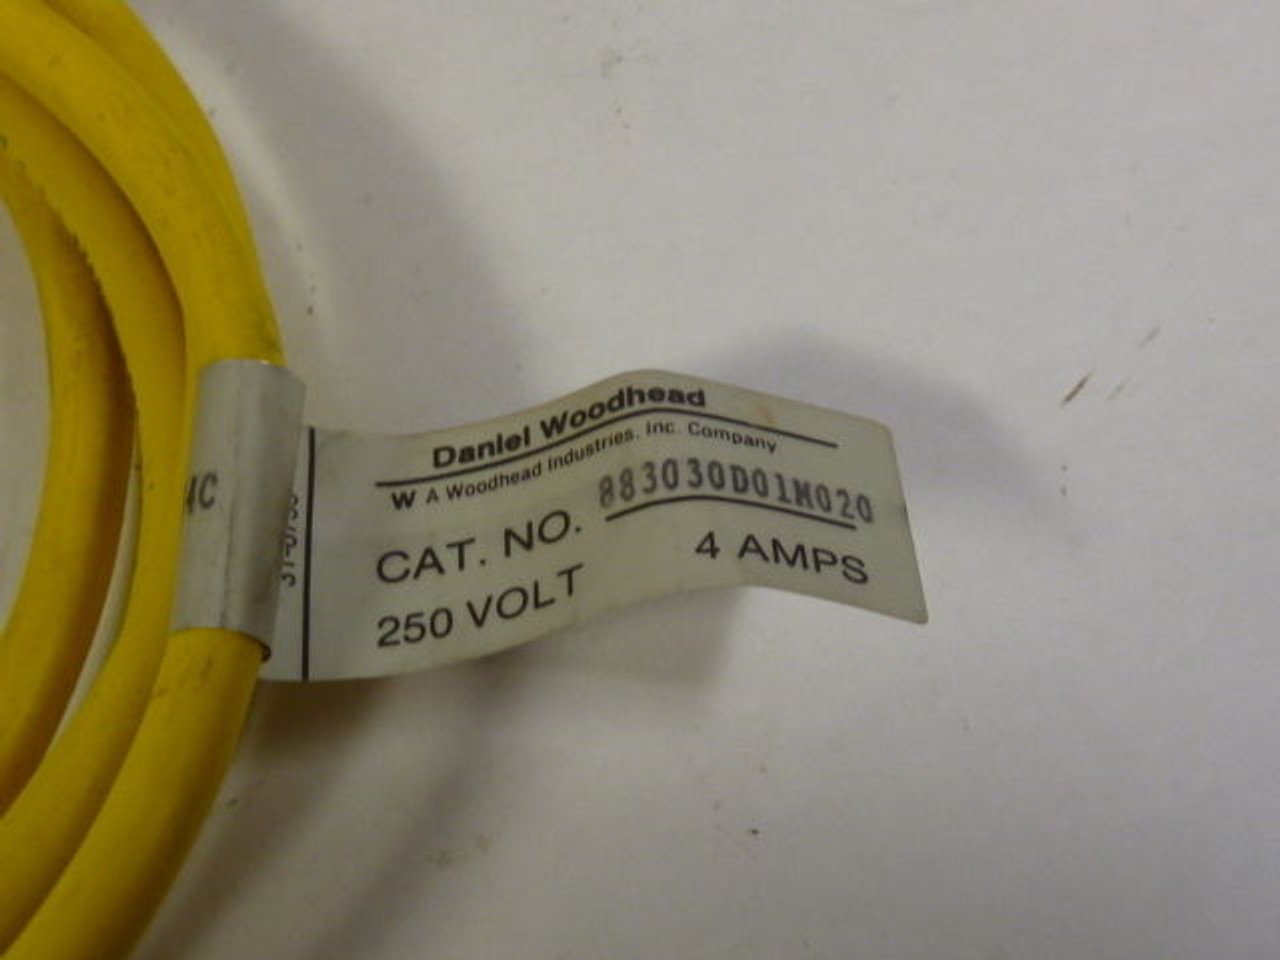 Woodhead 883030D01M020 Micro Change Cable ! NEW !